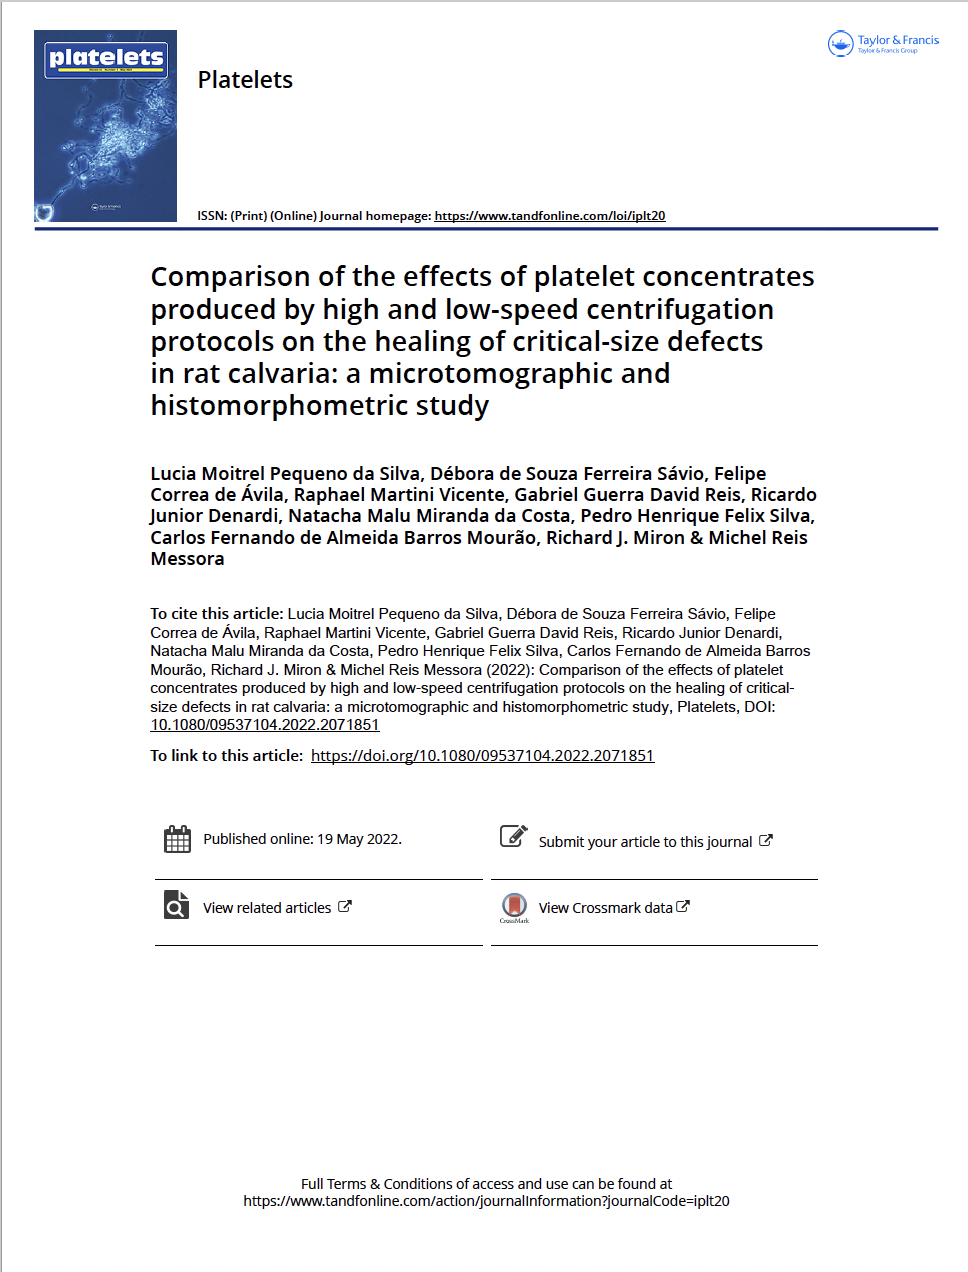 Comparison of the effects of platelet concentrates produced by high and low-speed centrifugation protocols on the healing of critical-size defects